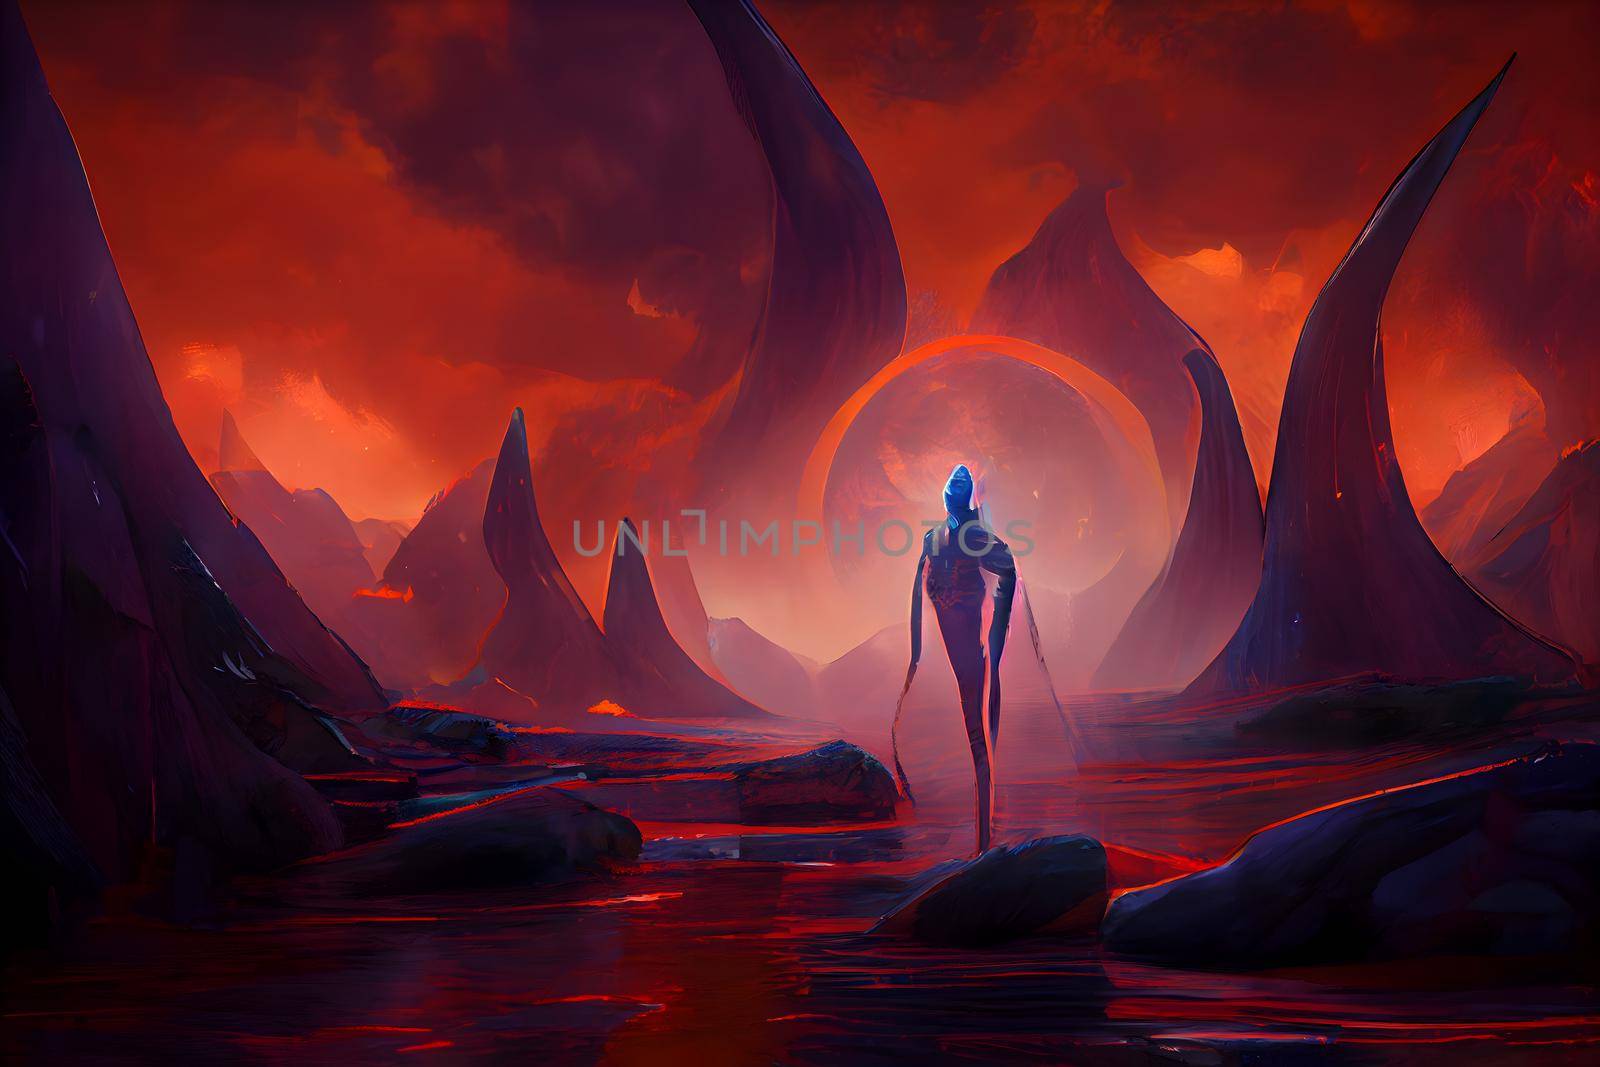 red extraterrestrial landscape with alien being in the center of image, neural network generated art. Digitally generated image. Not based on any actual scene or pattern.